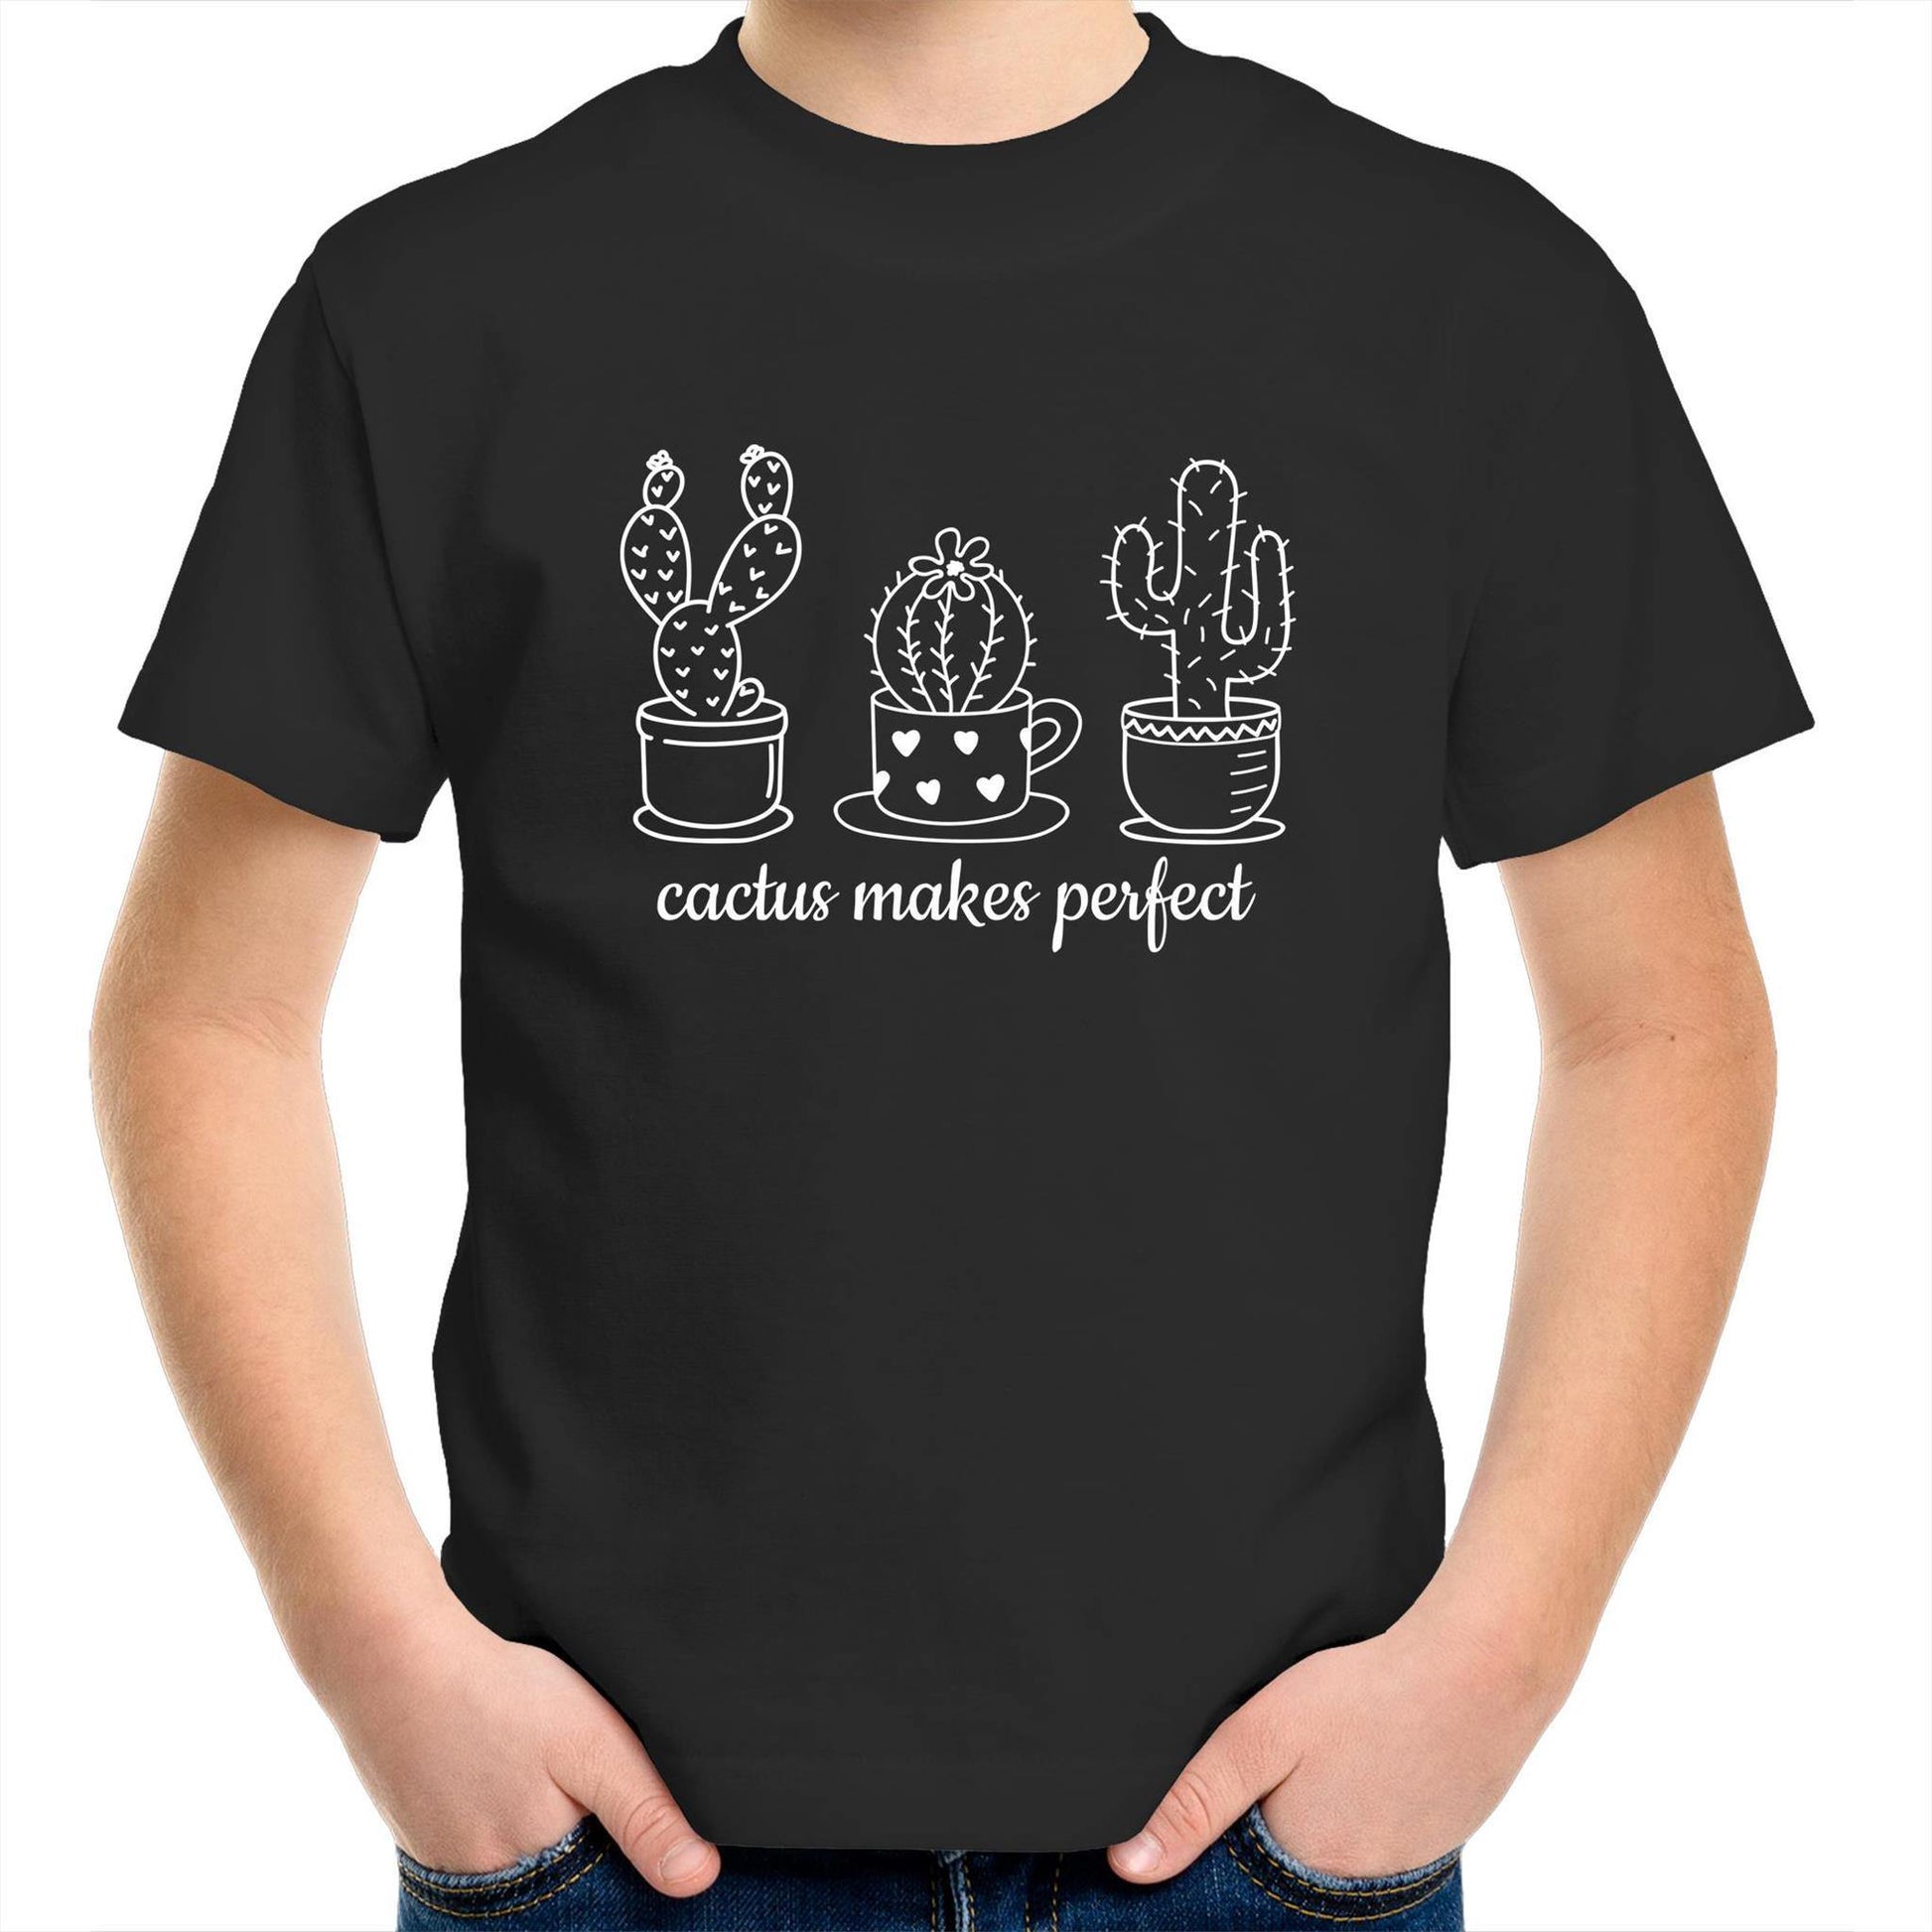 Cactus Makes Perfect - Kids Youth Crew T-Shirt Black Kids Youth T-shirt Plants